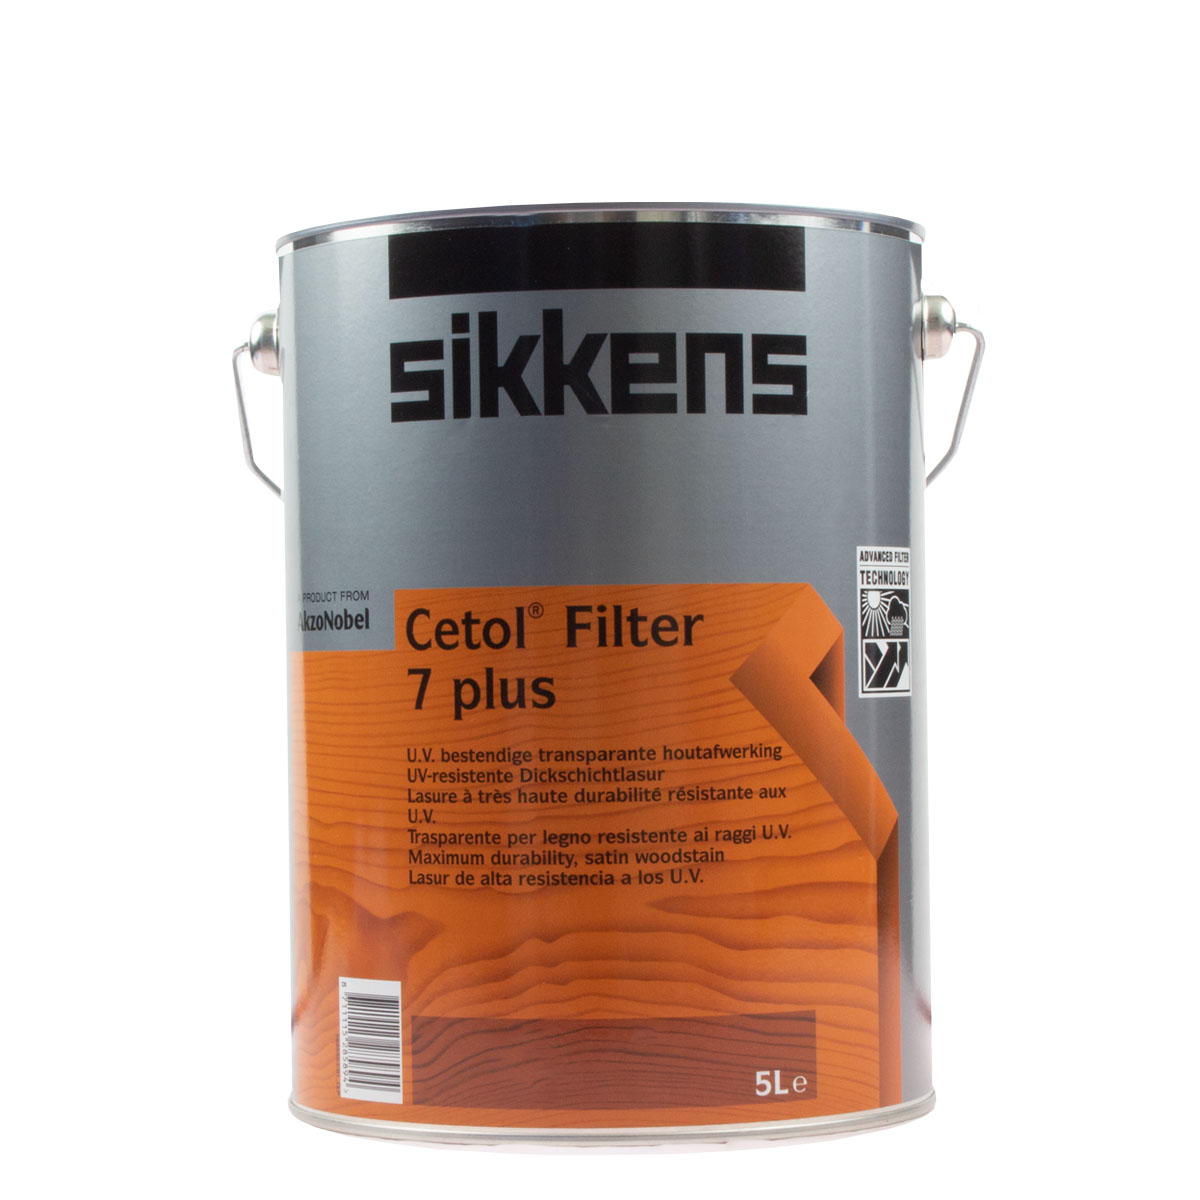 sikkens_cetolfilter_7plus_5l_gross